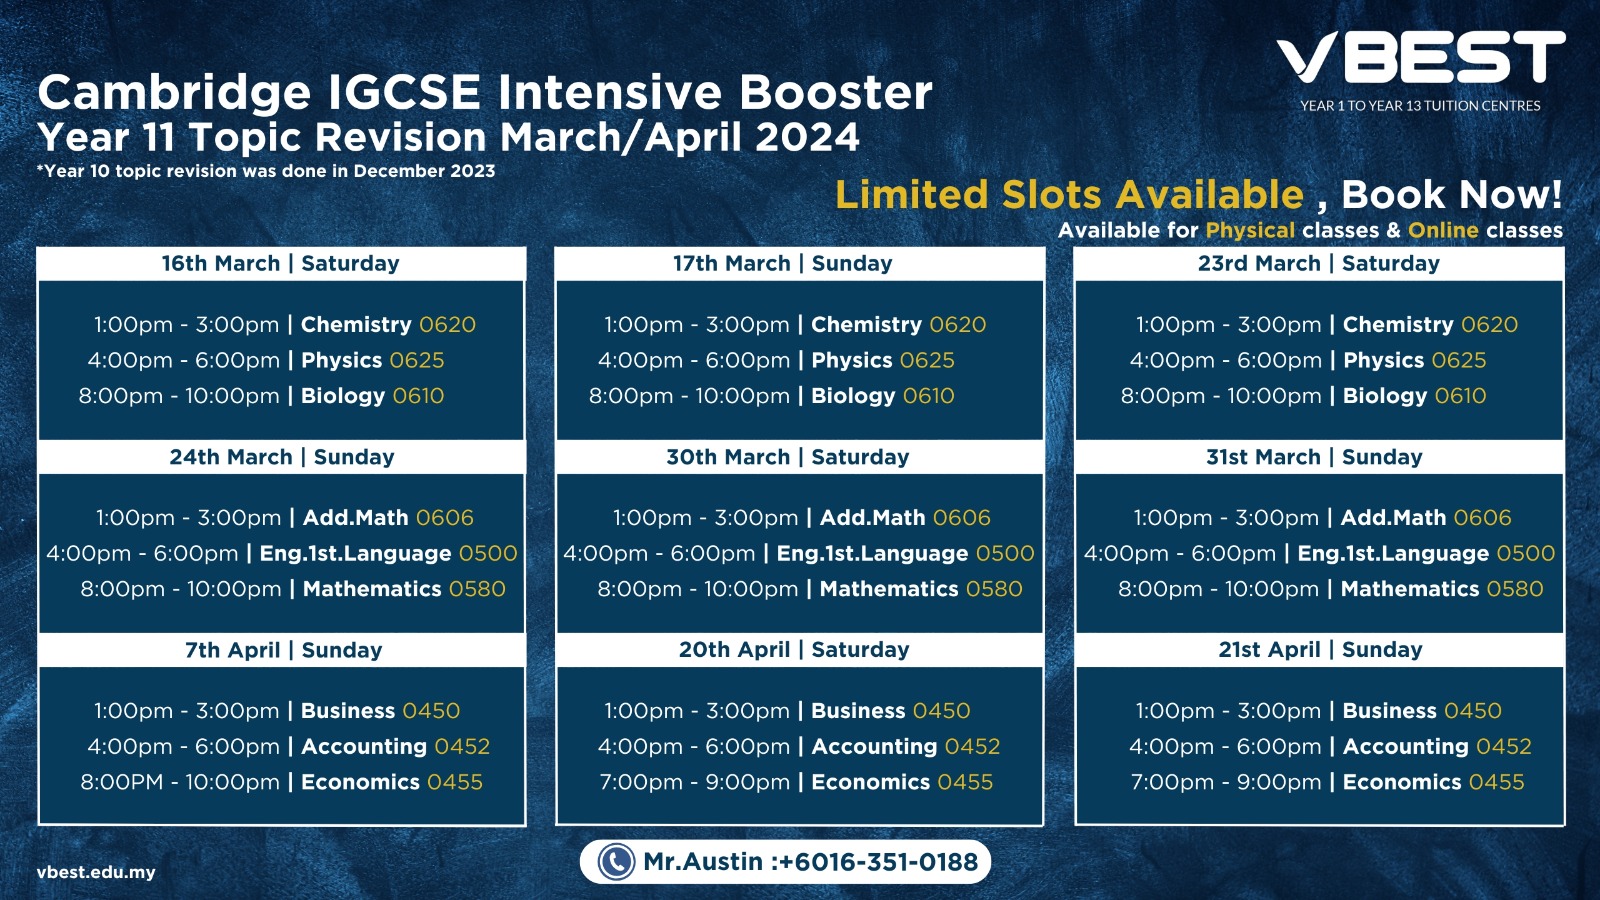 igcse intensive course,igcse,holiday booster,intensive course,holiday course,intensive booster,igcse courses online,igcse booster malaysia,igcse course malaysia 🏆 Booster - Year 11 IGCSE Intensive Course Mar/Apr 2024 VBest Year 1 to Year 13 Tuition Centre